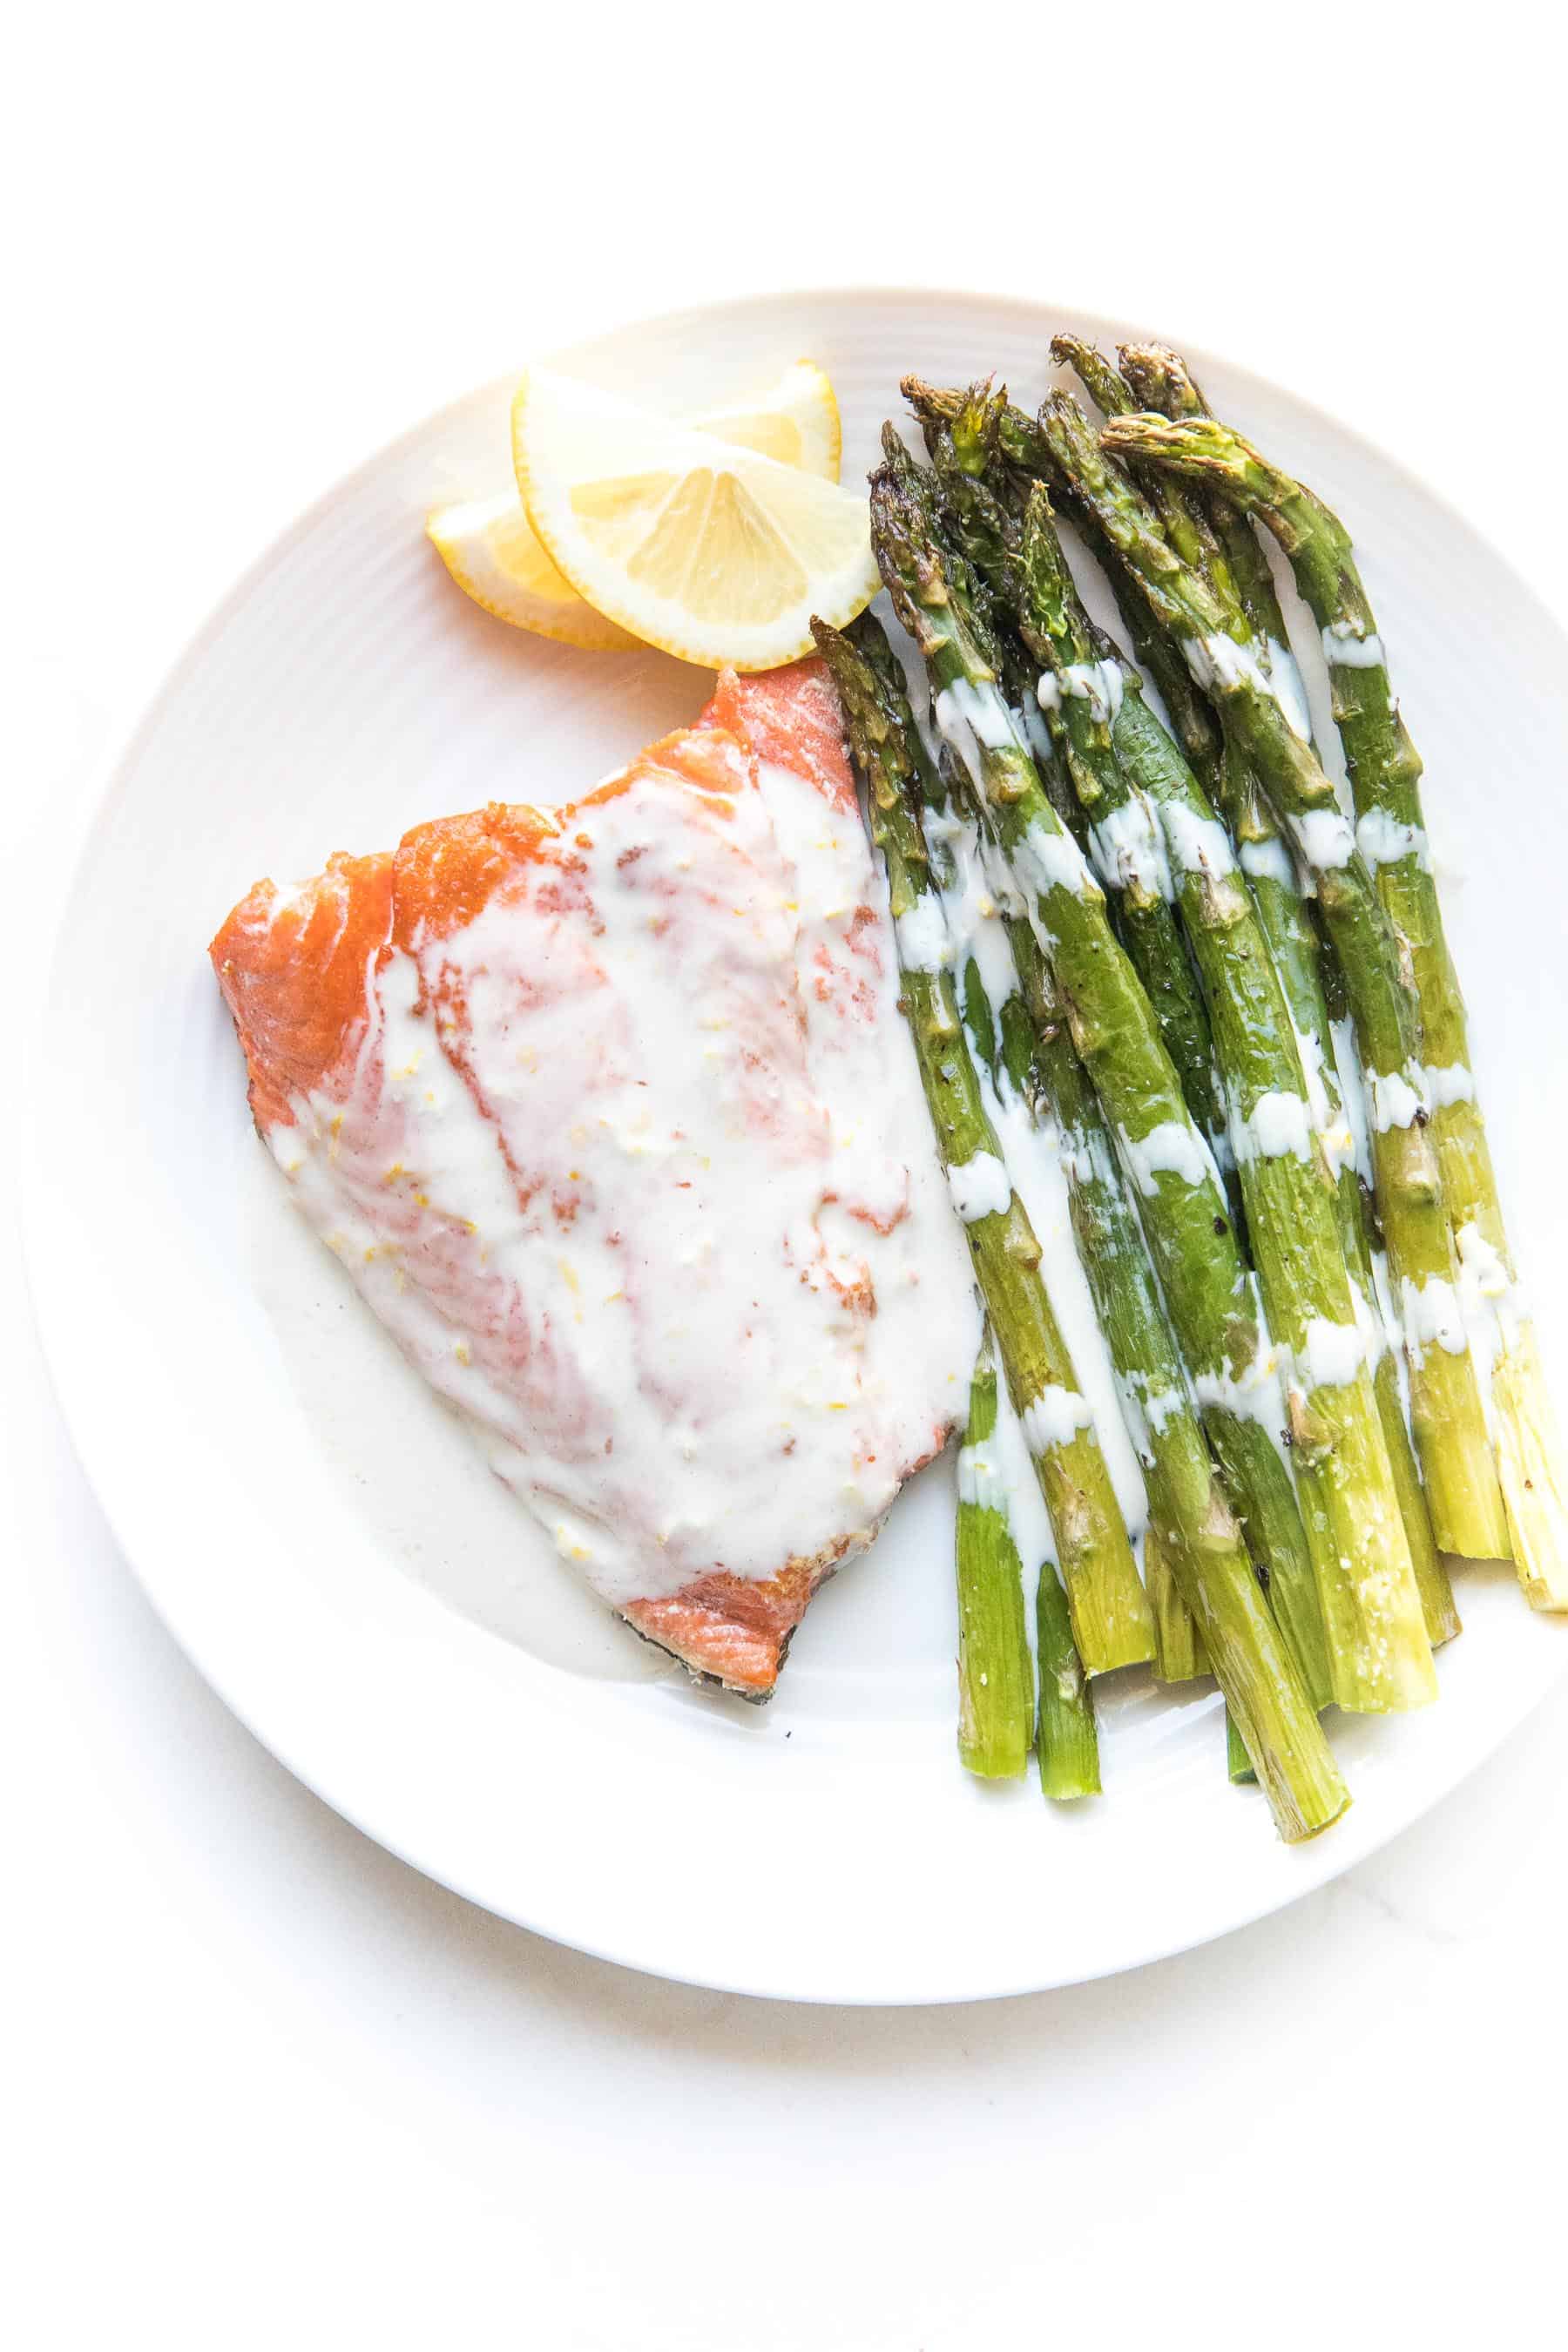 Salmon + asparagus with a white creamy coconut tahini sauce on a white plate and background